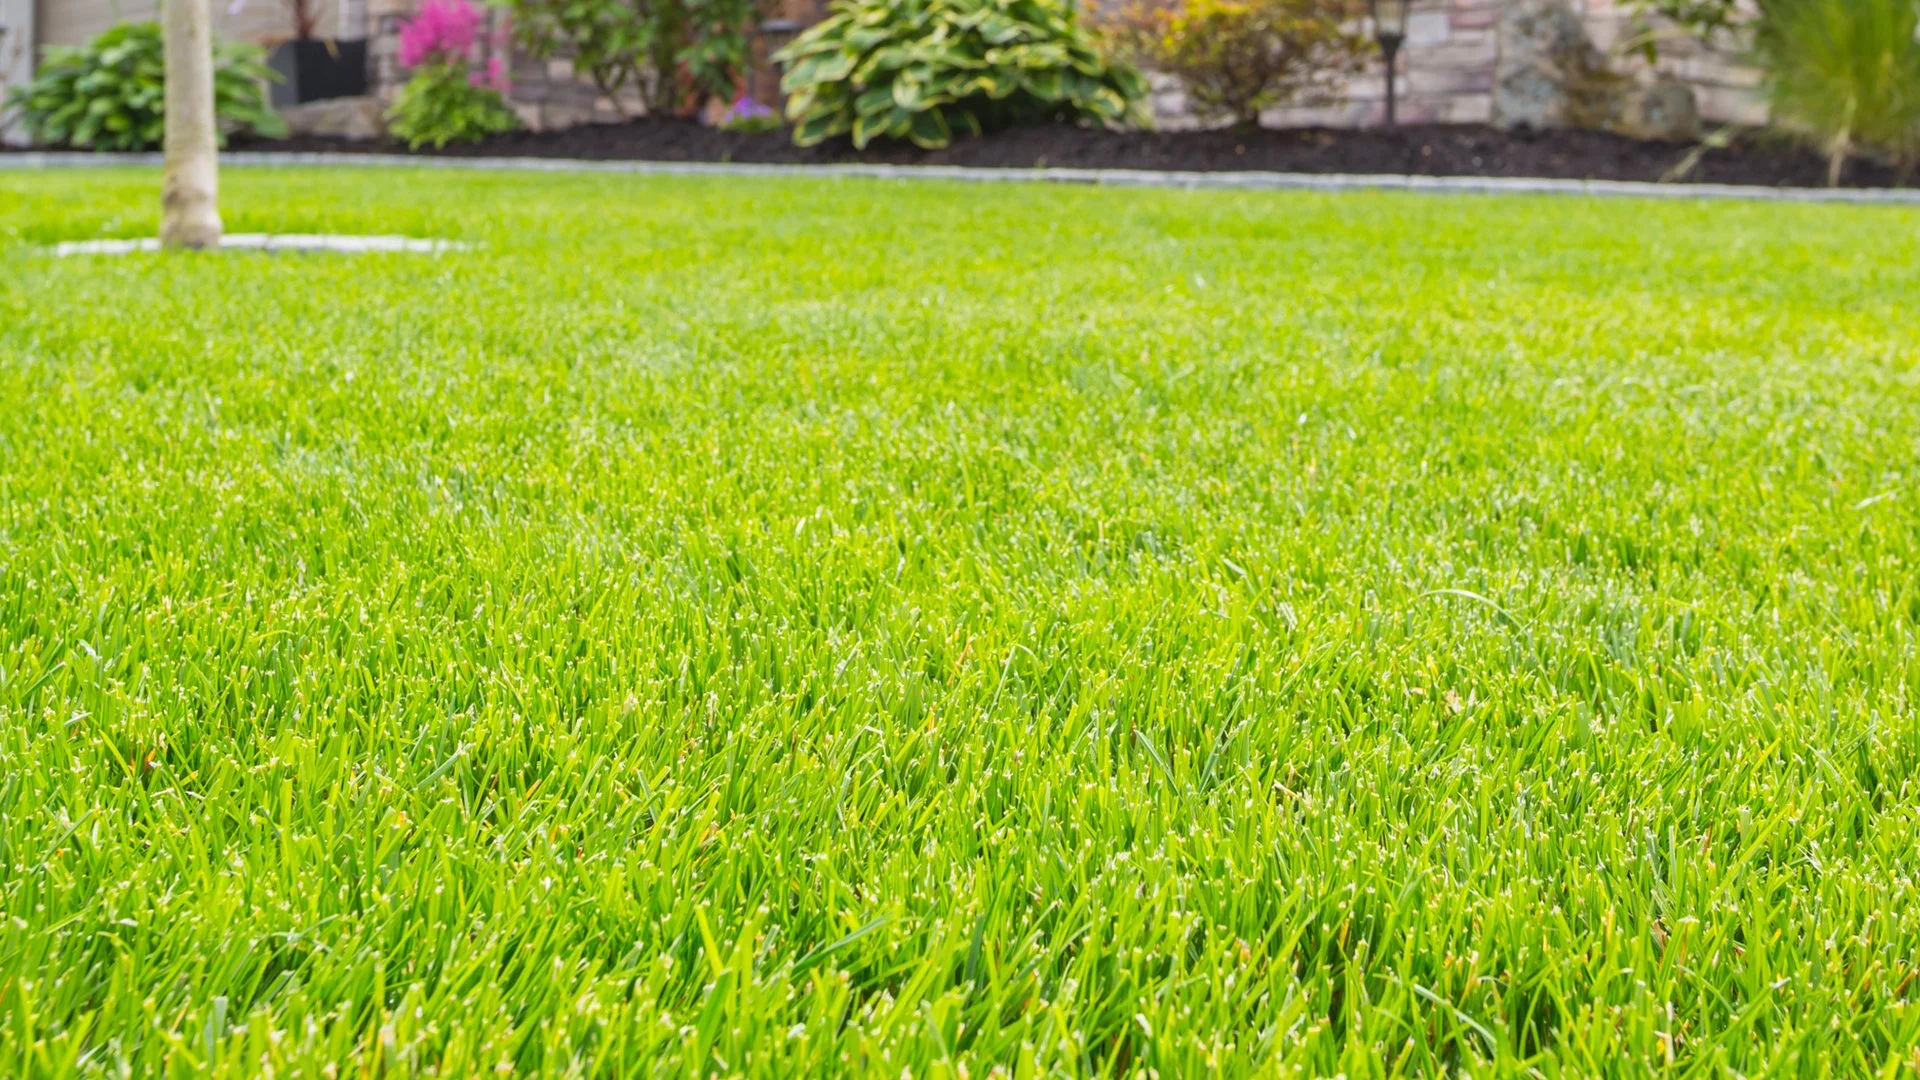 Is Granular or Liquid Fertilizer Better for Your Lawn in Ohio?